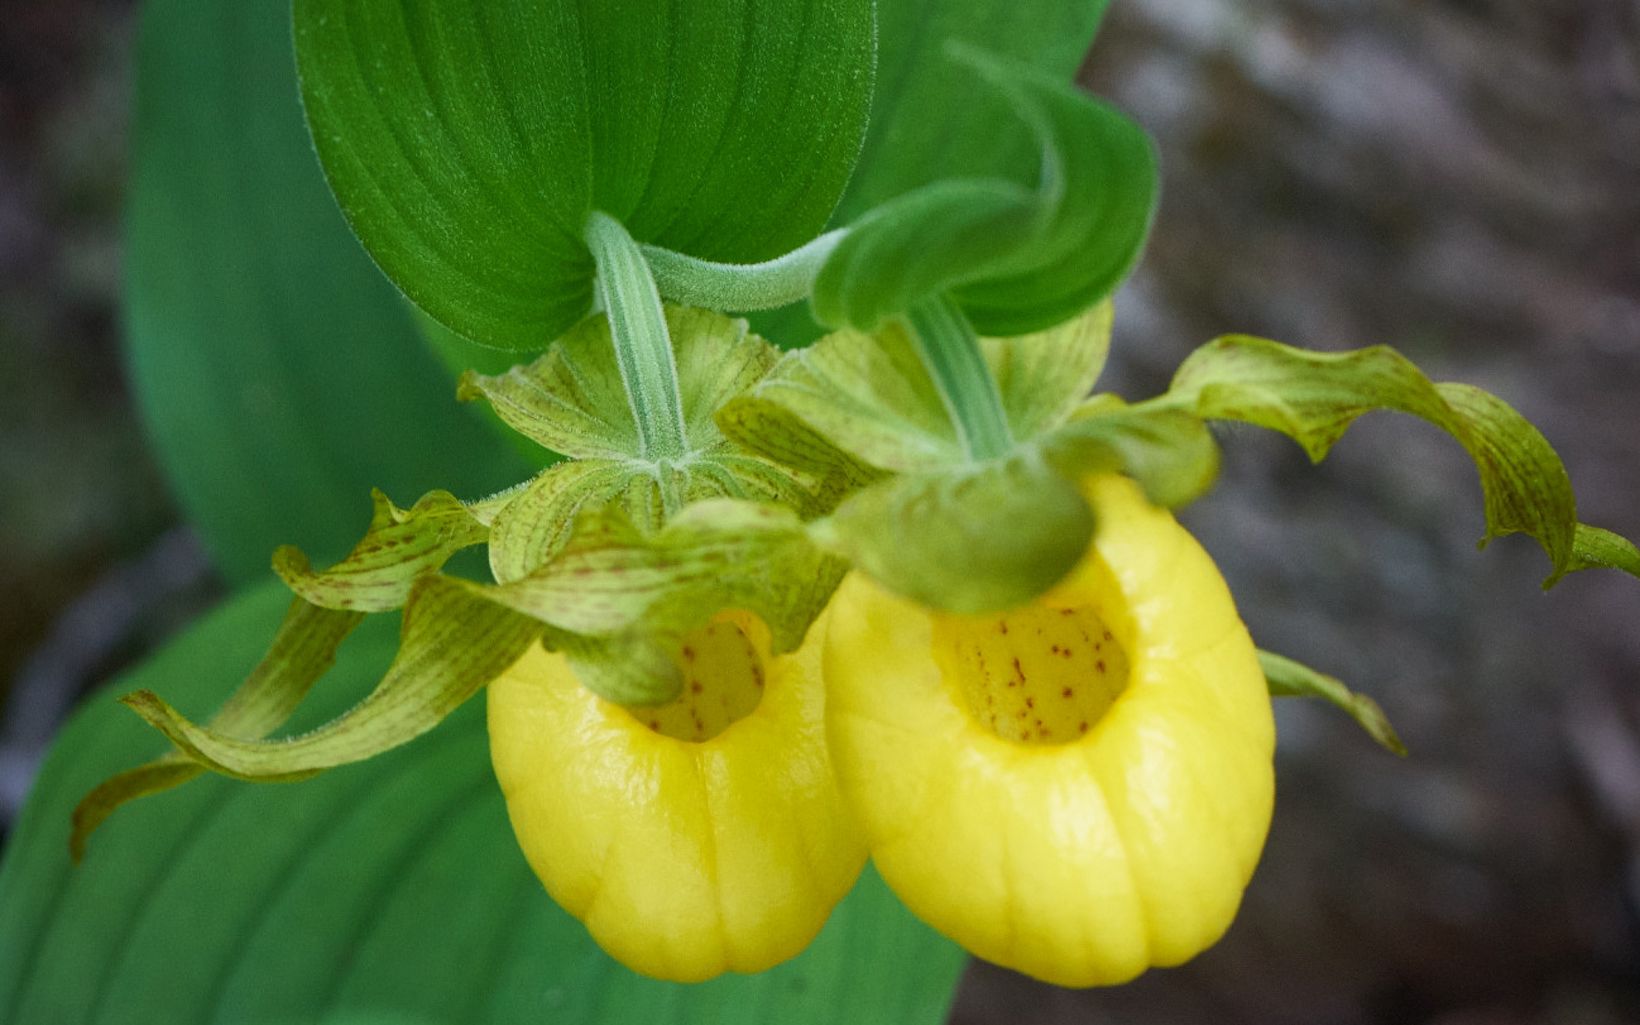 Two yellow slipper-shaped flowers.